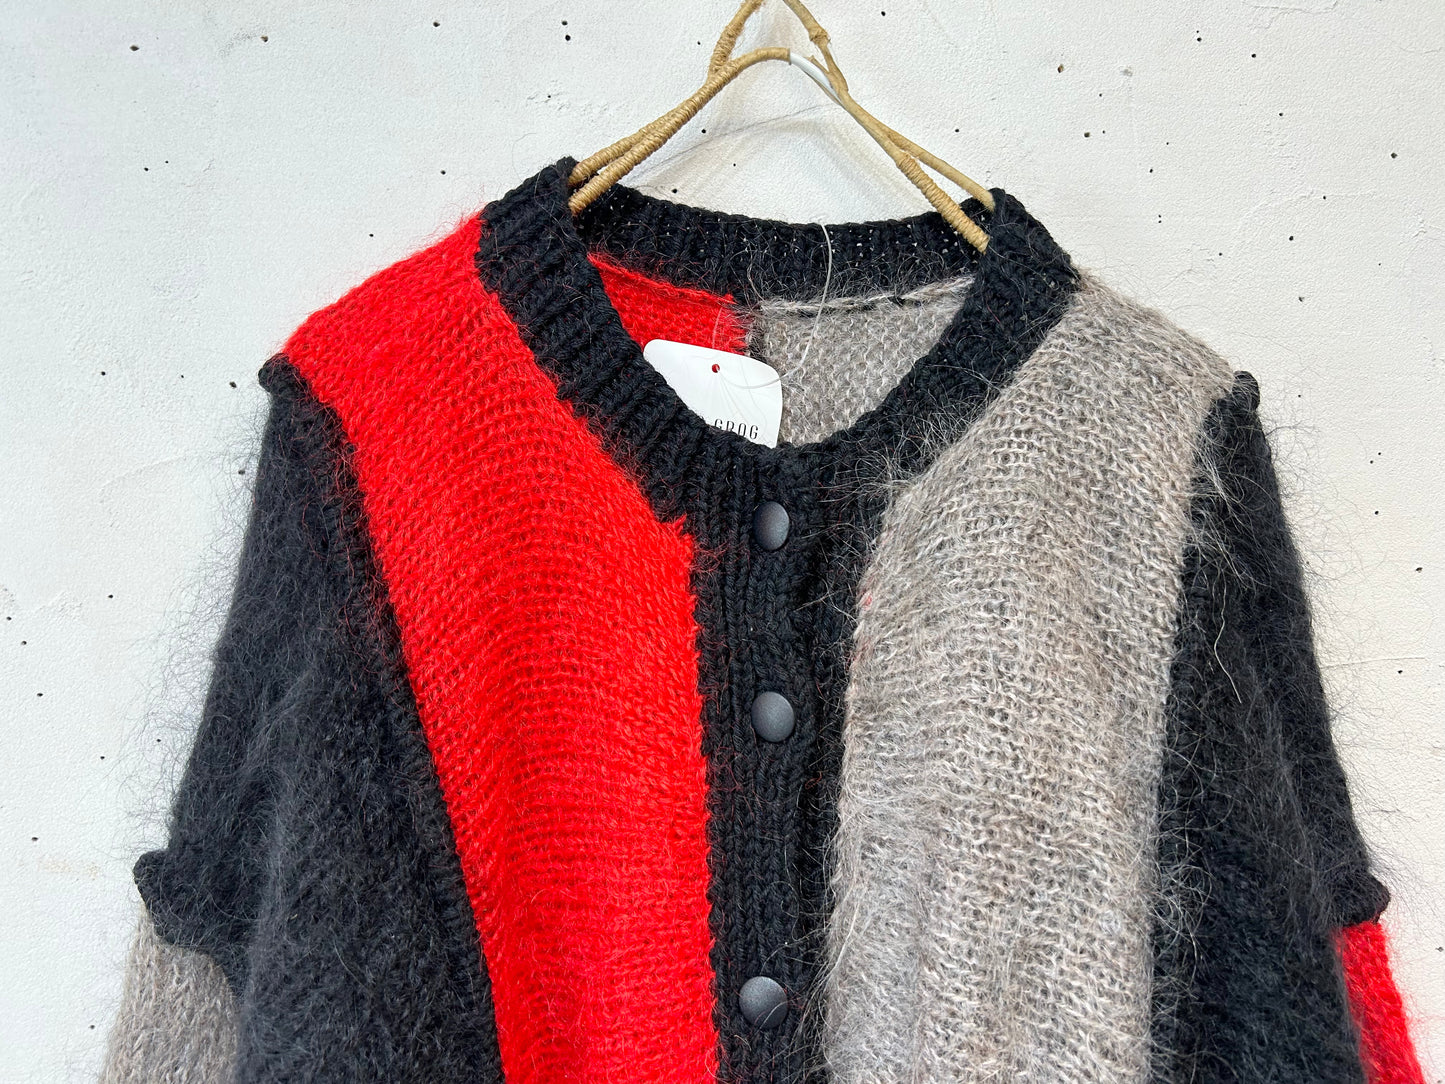 Vintage Mohair Knit Cardigan MADE IN IRELAND [K25570]